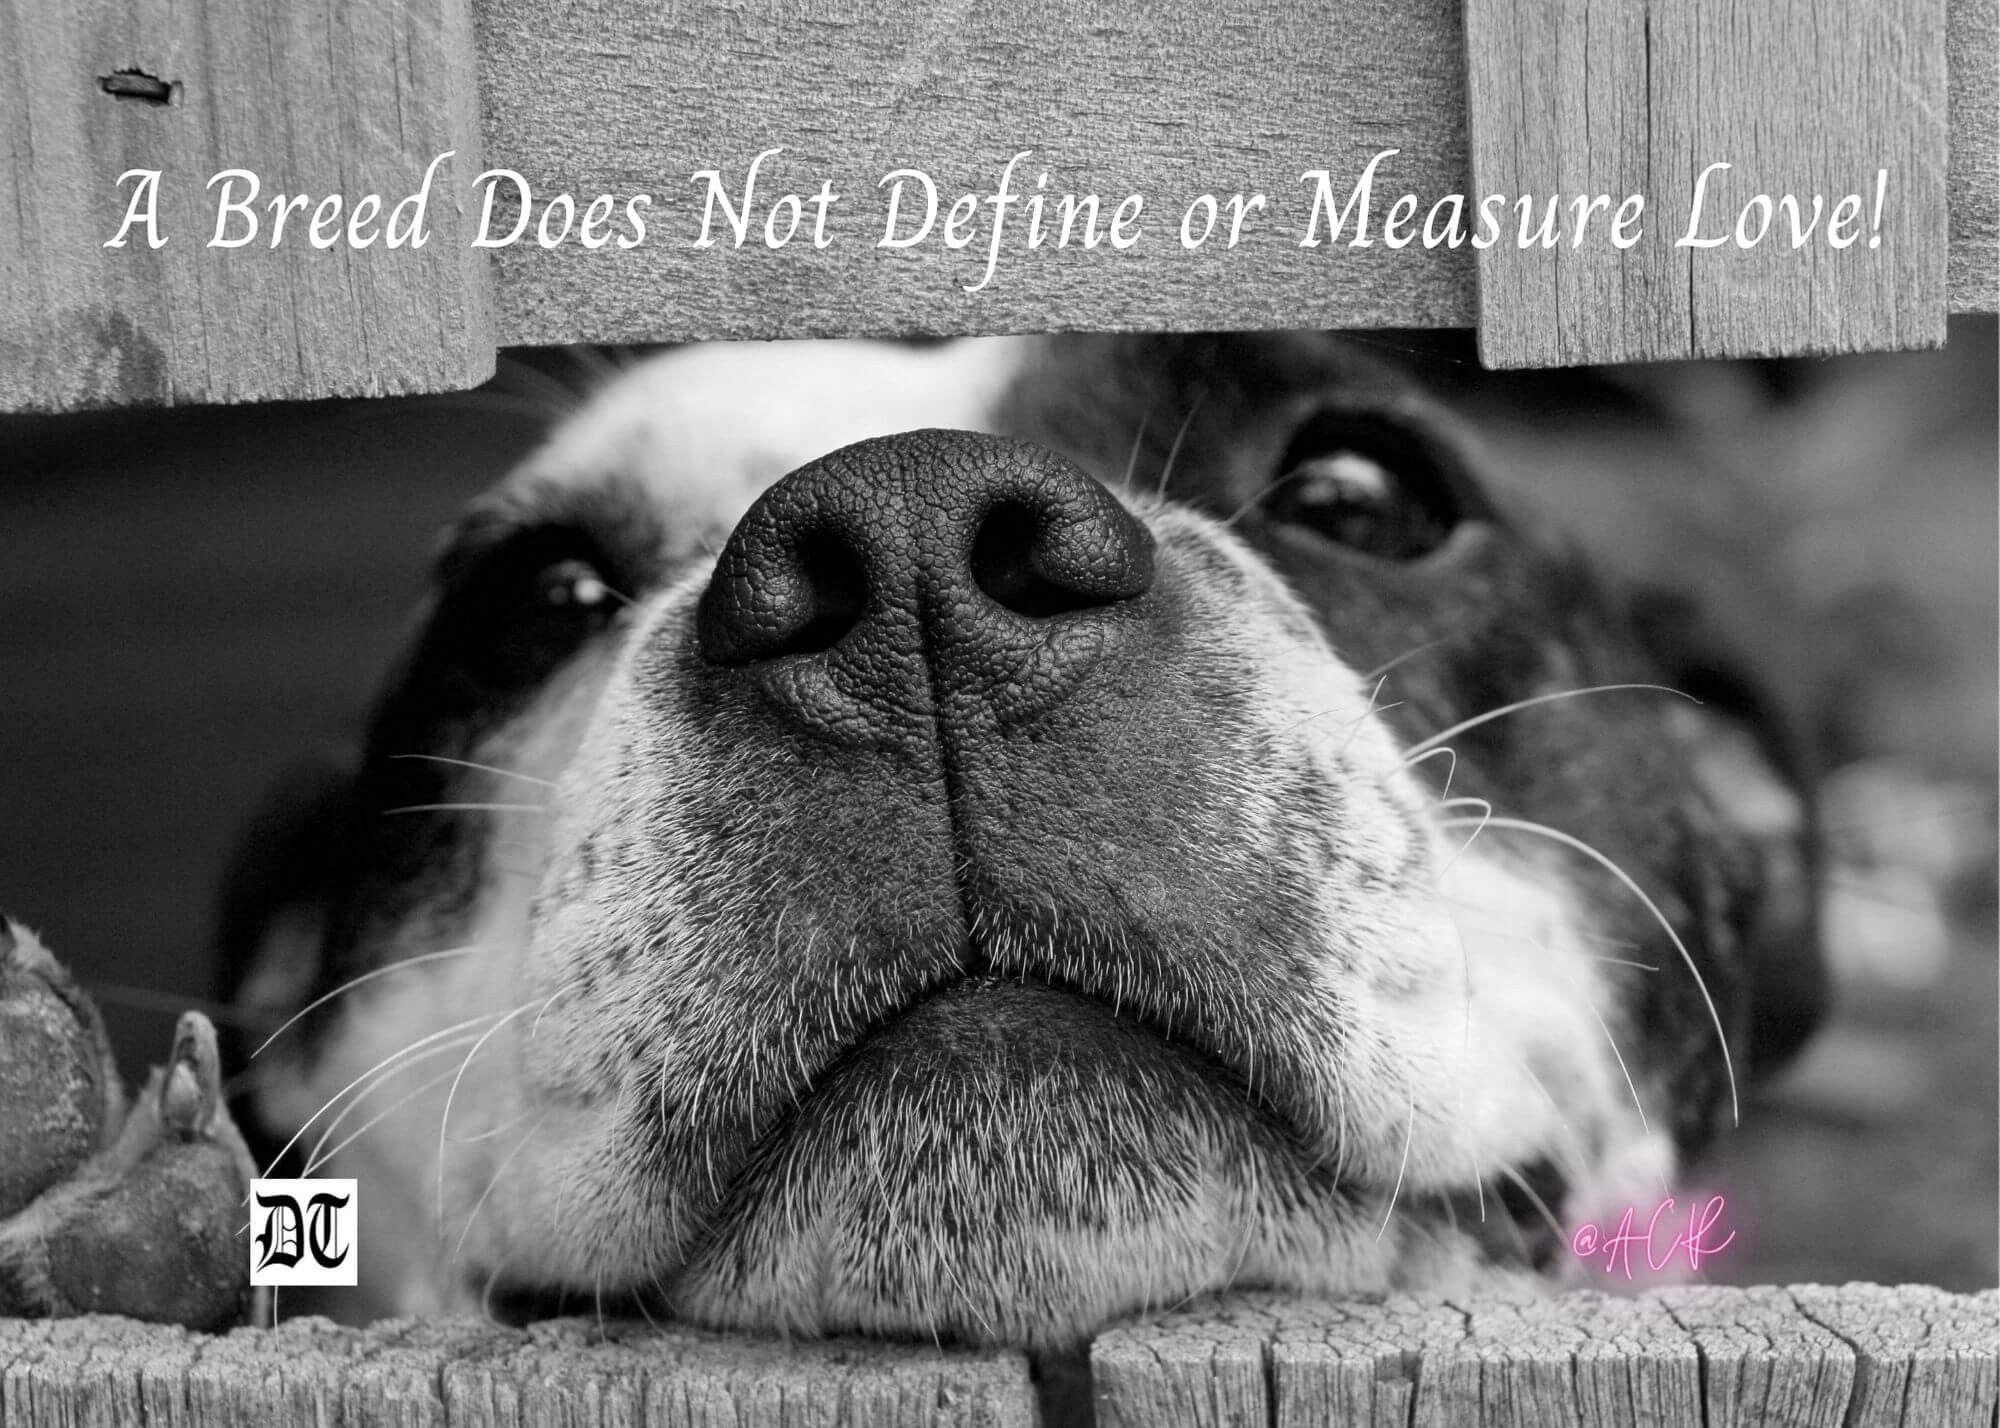 A Breed Does Not Define or Measure Love! - Different Truths